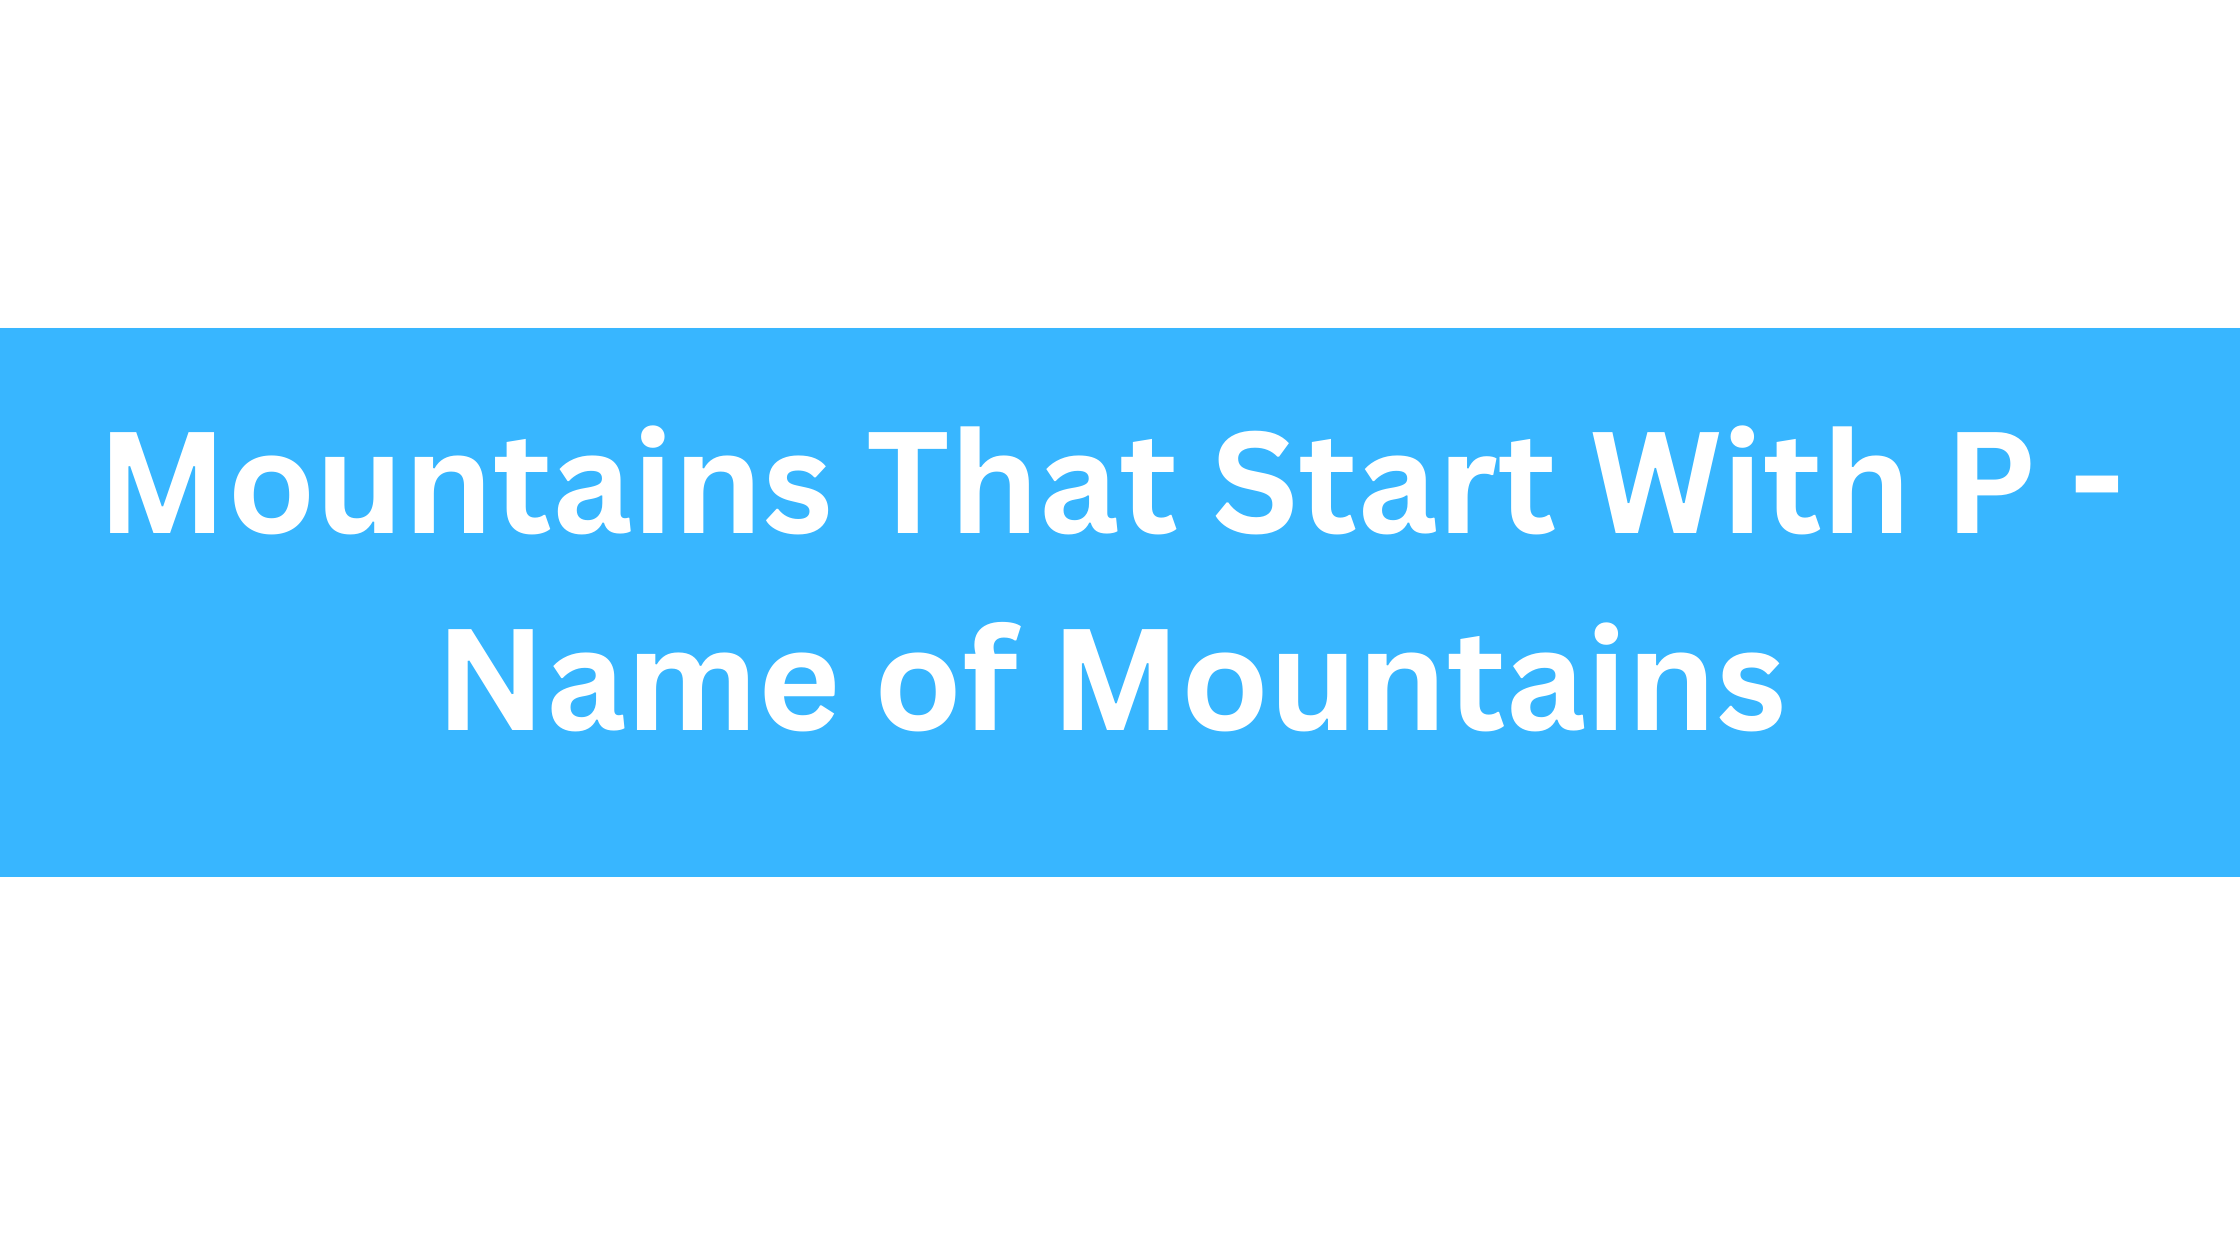 Mountains That Start With P